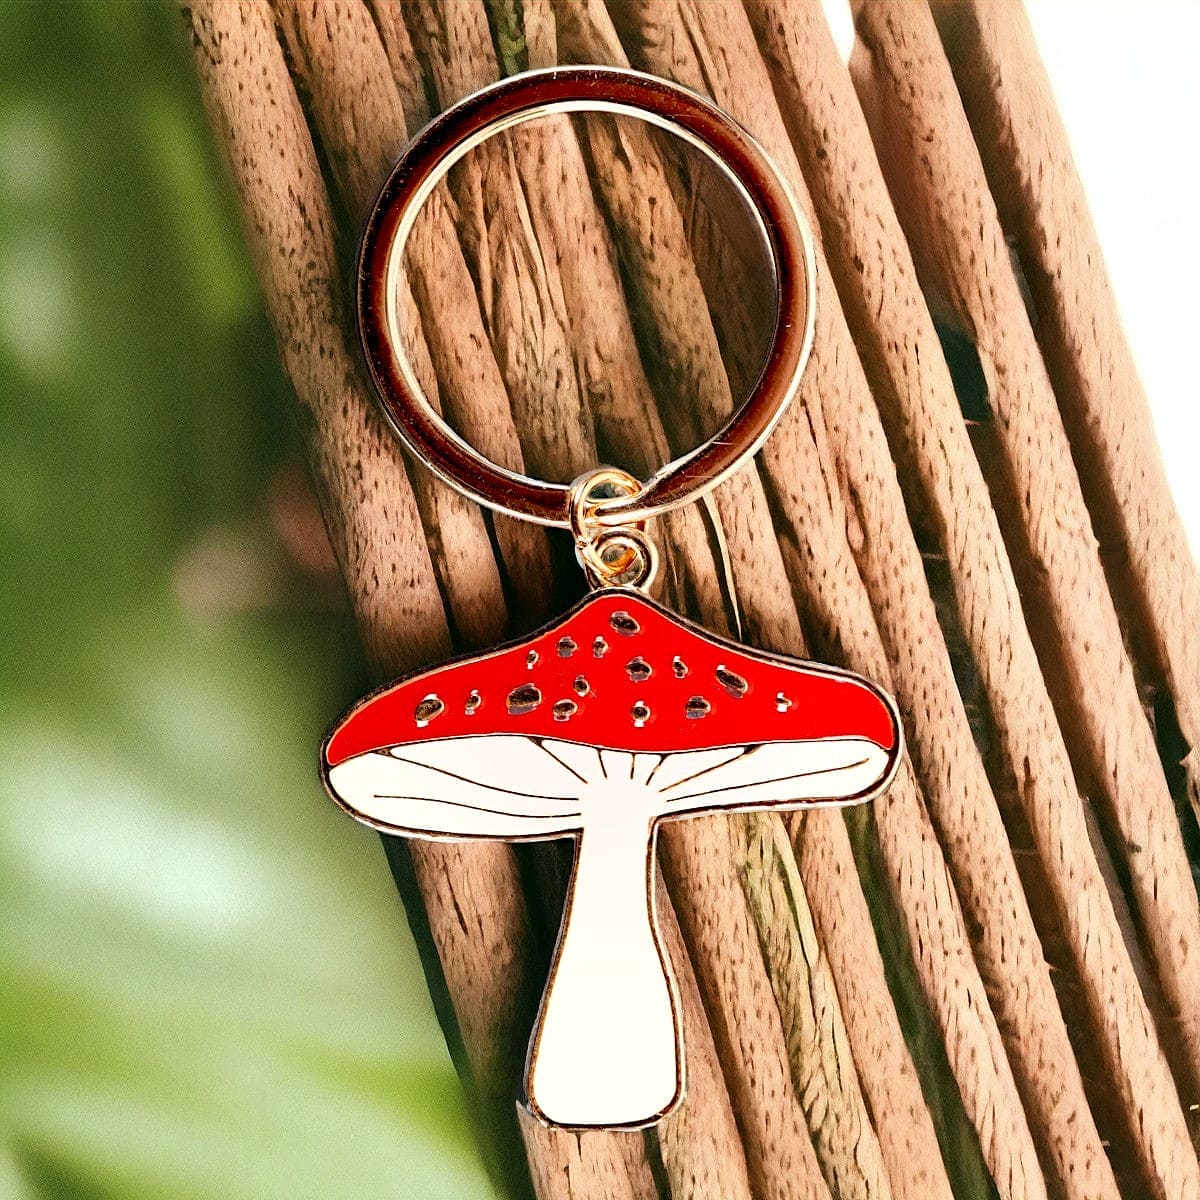 Lucky Toadstool Keyring, Enchanted Forest - Bag Charms & Keyrings by Jones Home & Gifts